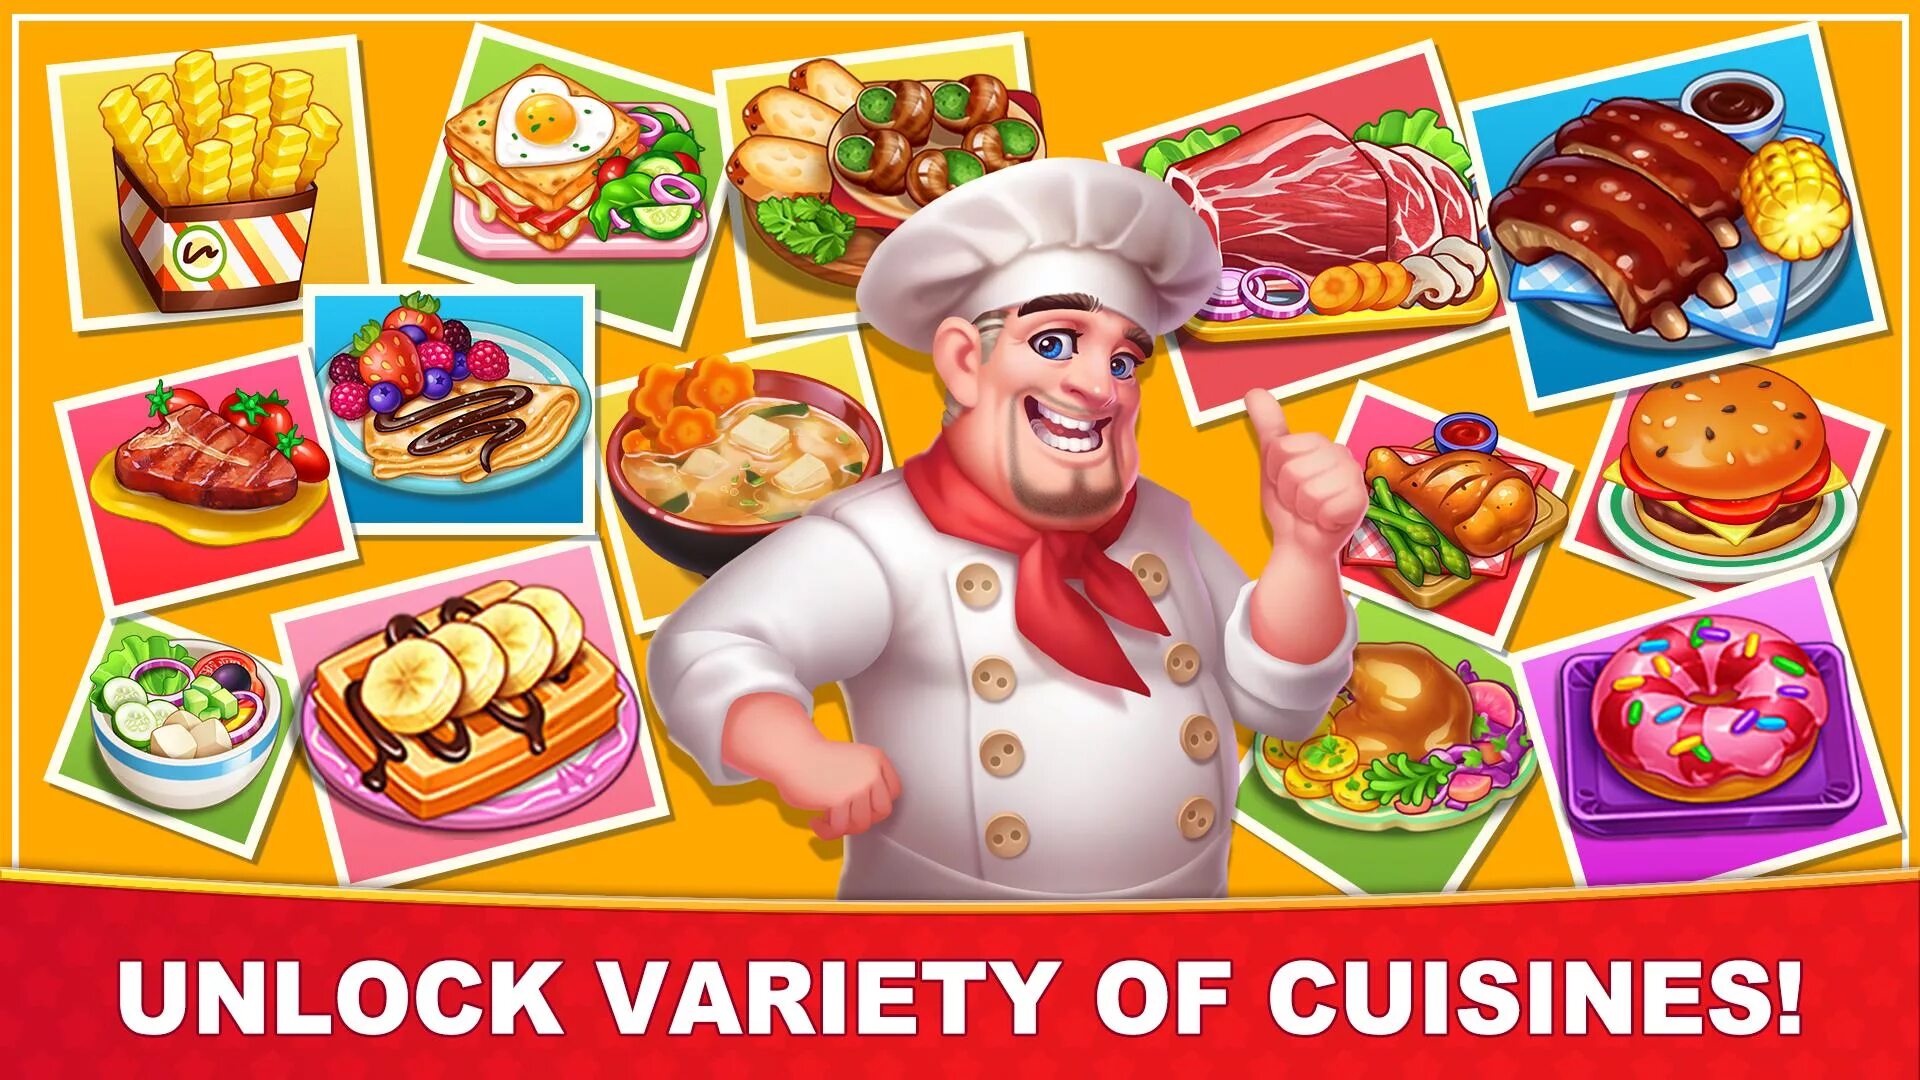 Hot cooking. Картинки для игры профессии. Cooking pizza and ingredienti.